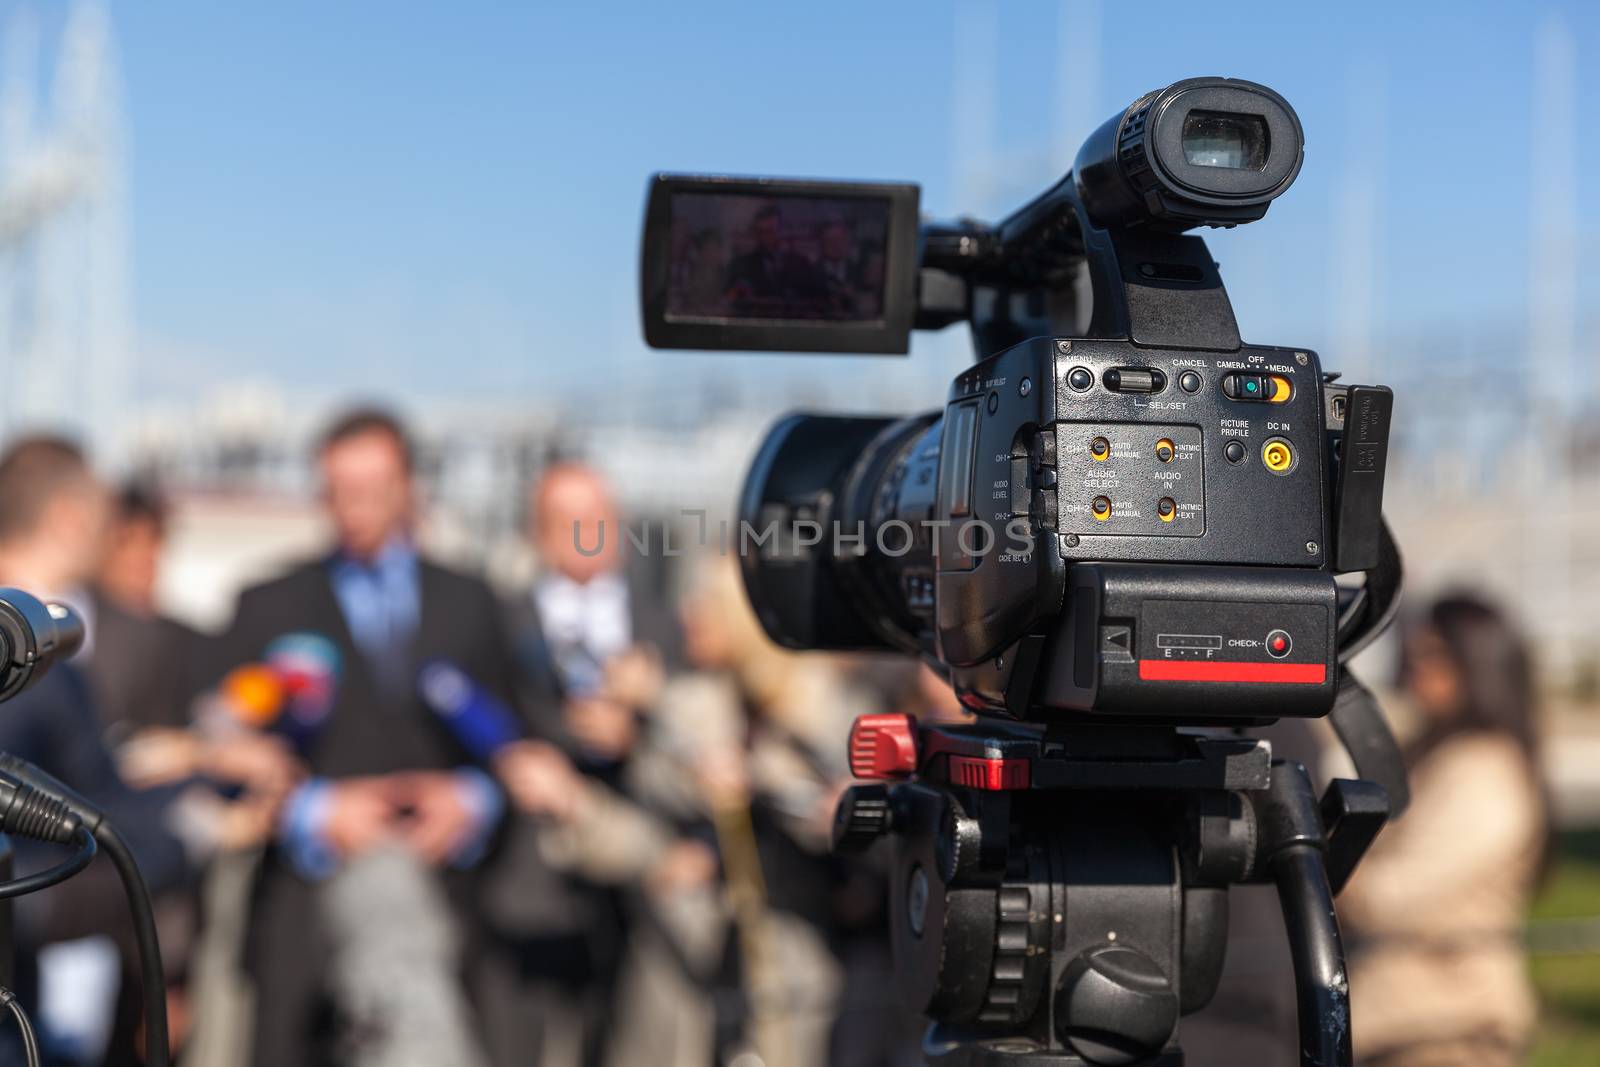 News conference. Filming an event with a video camera. by wellphoto